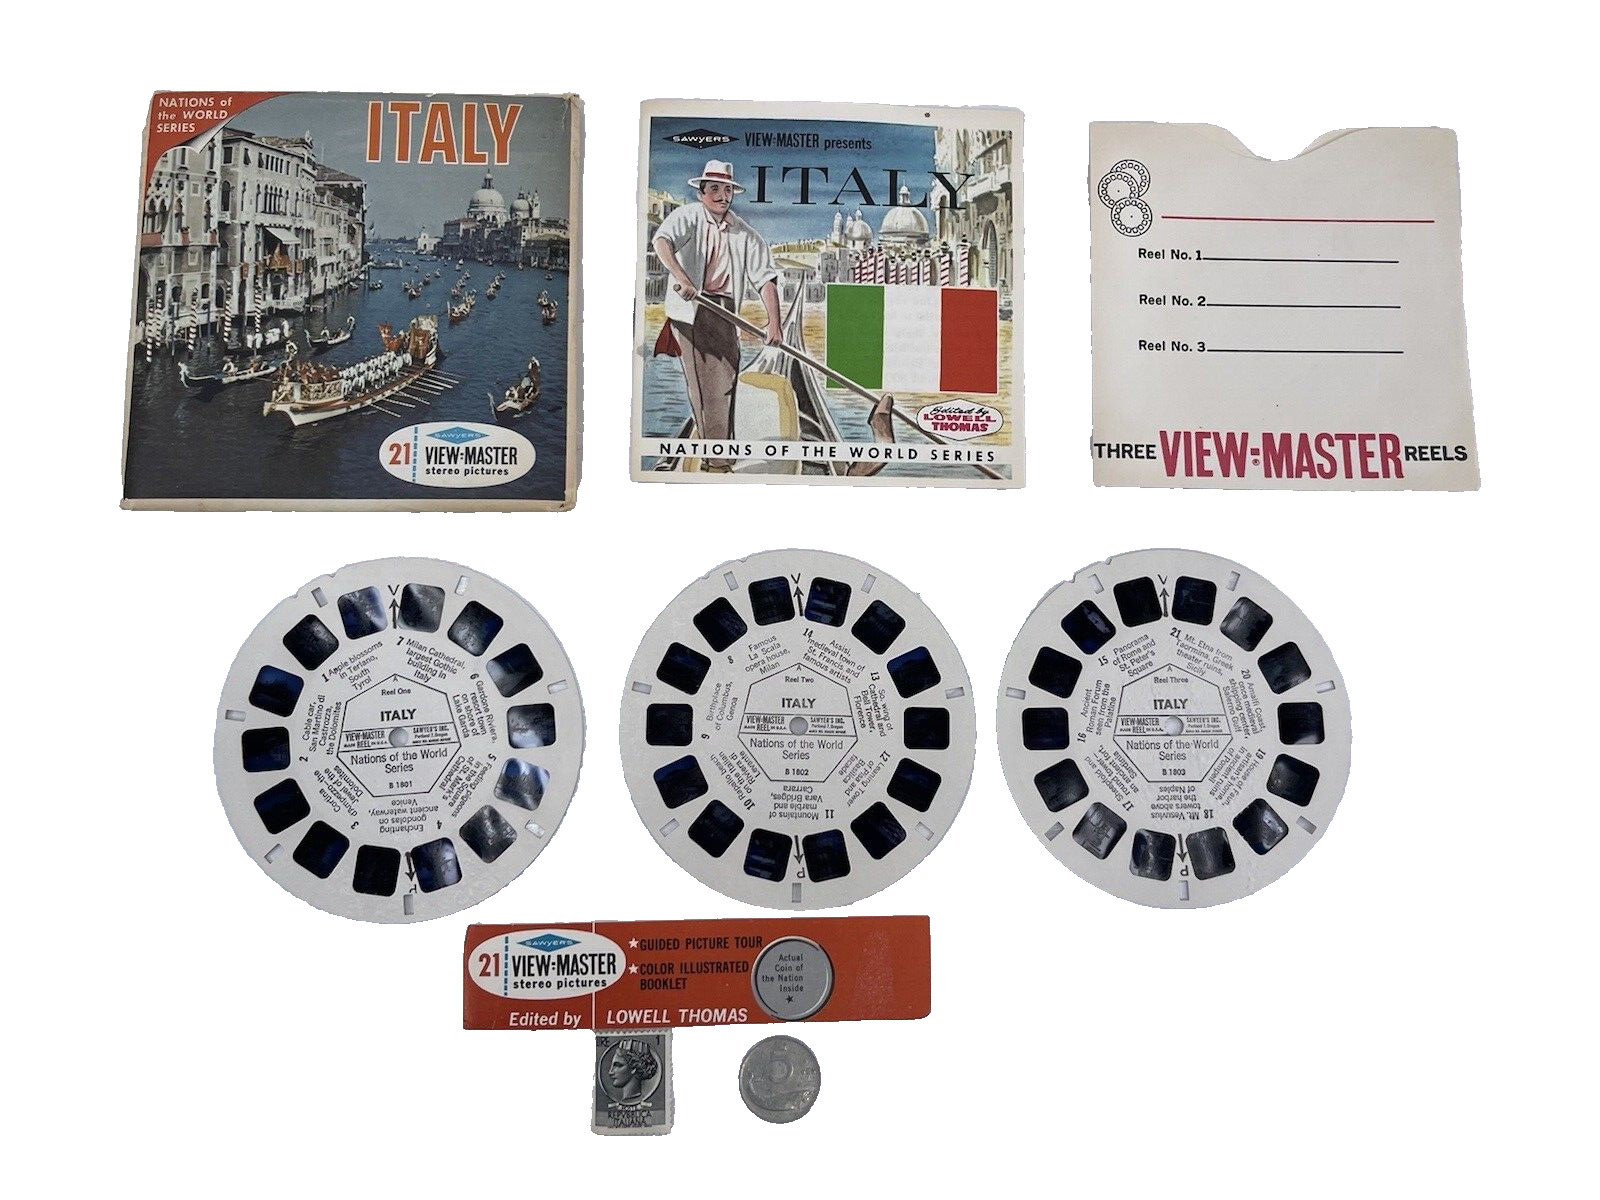 Vintage View Master B180 Italy Nations of the World master reels stamp and coin